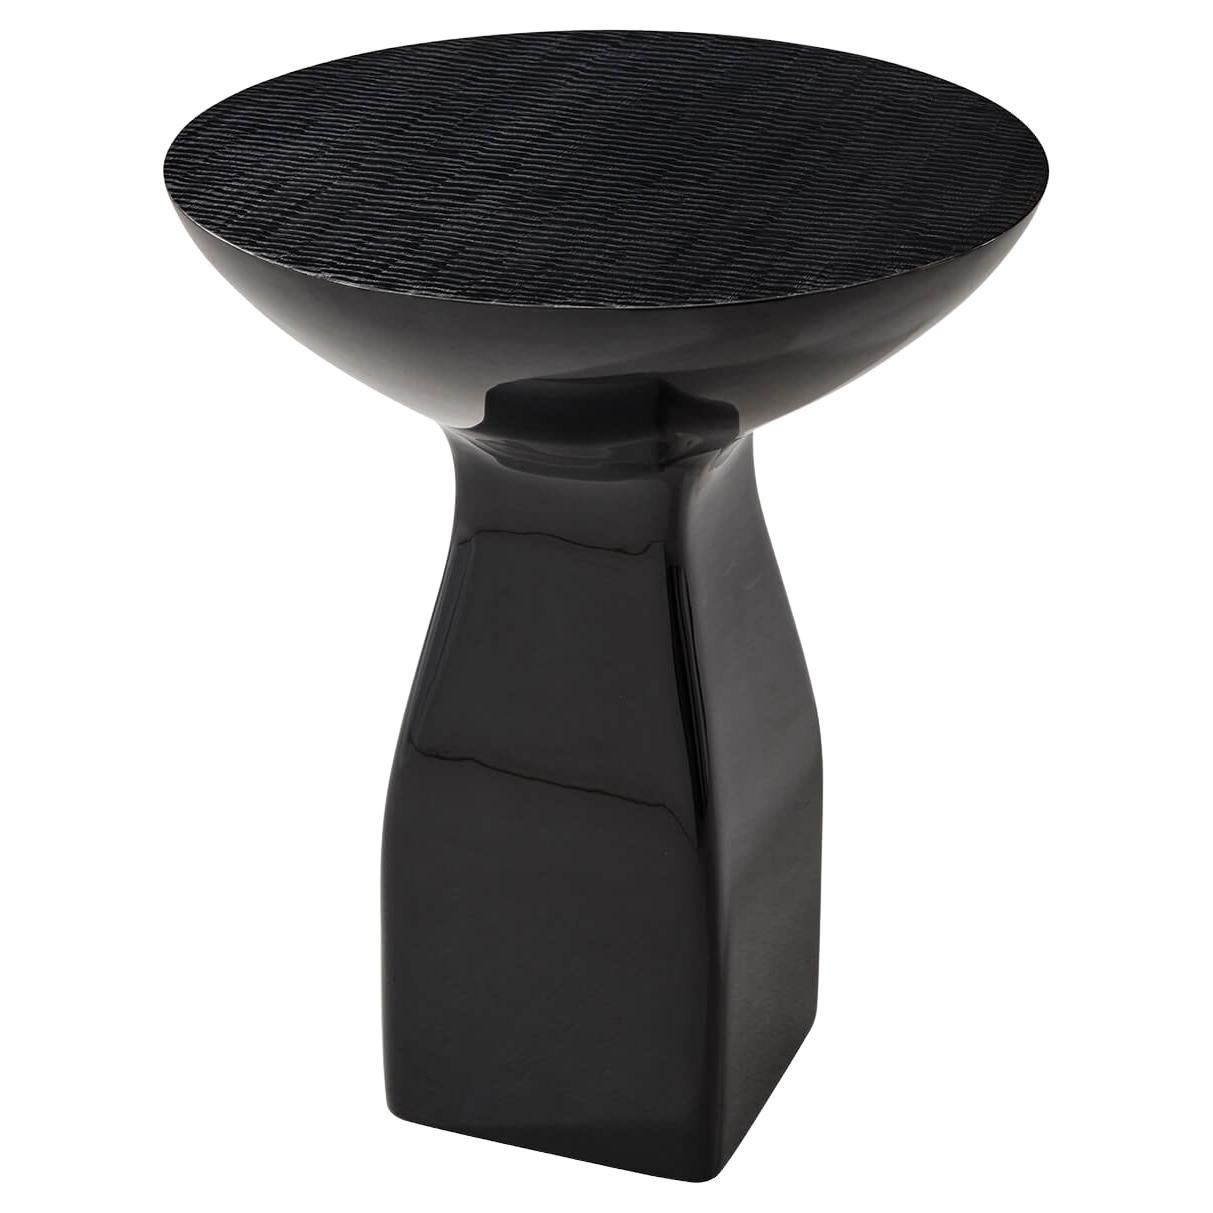 Modern Lacquered Pedestal Table